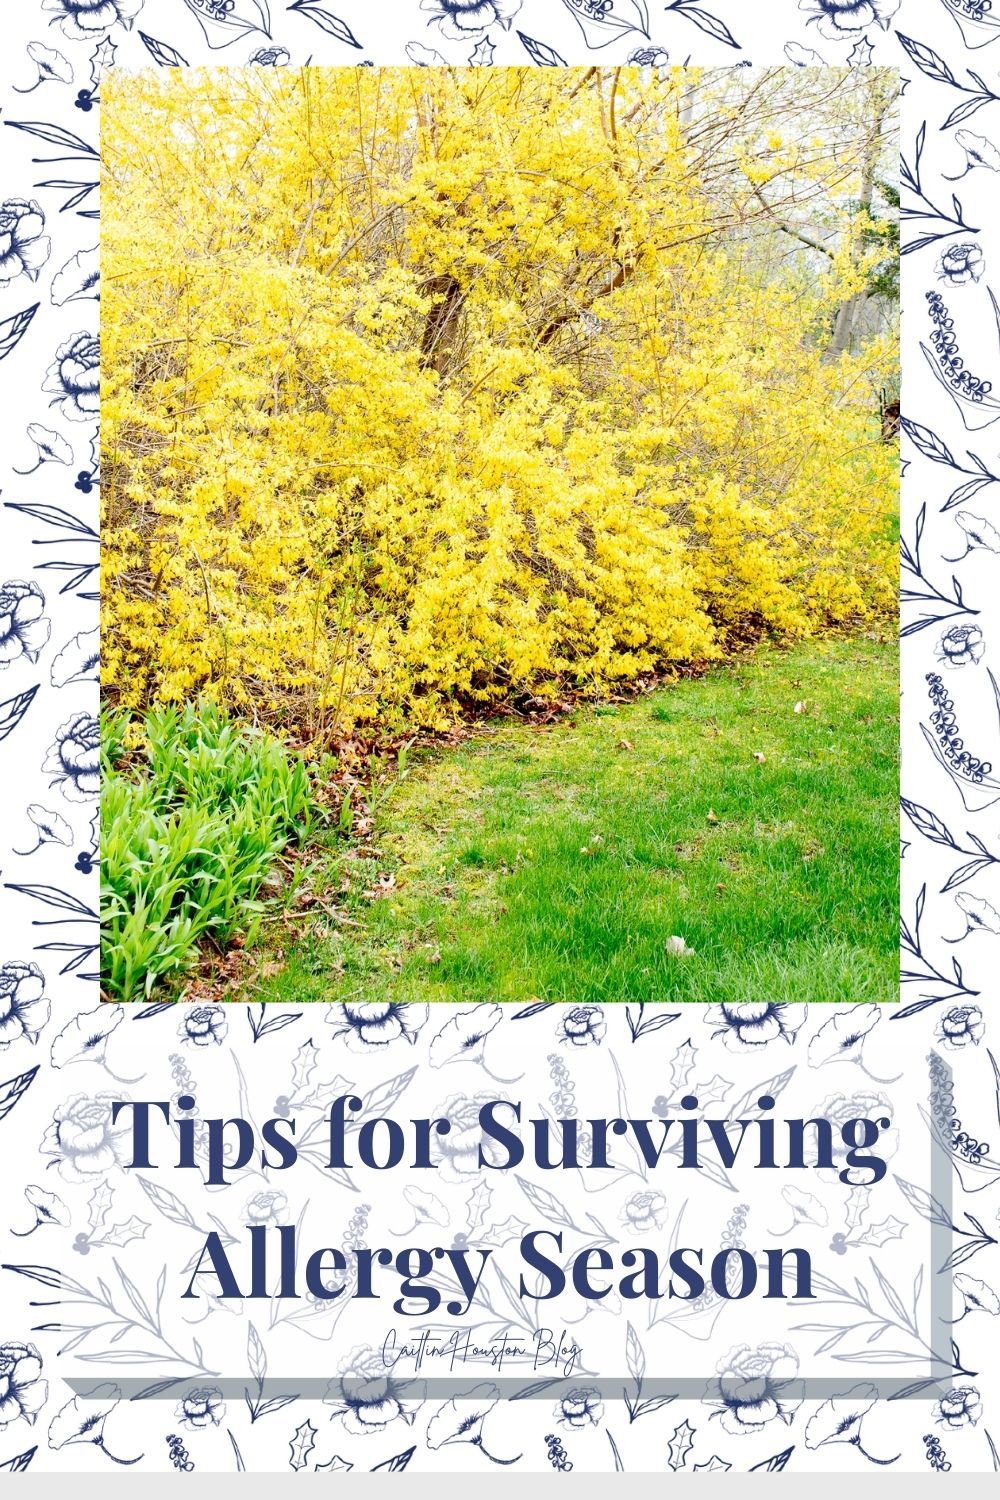 Tips for surviving allergy season with Caitlin Houston Blog 